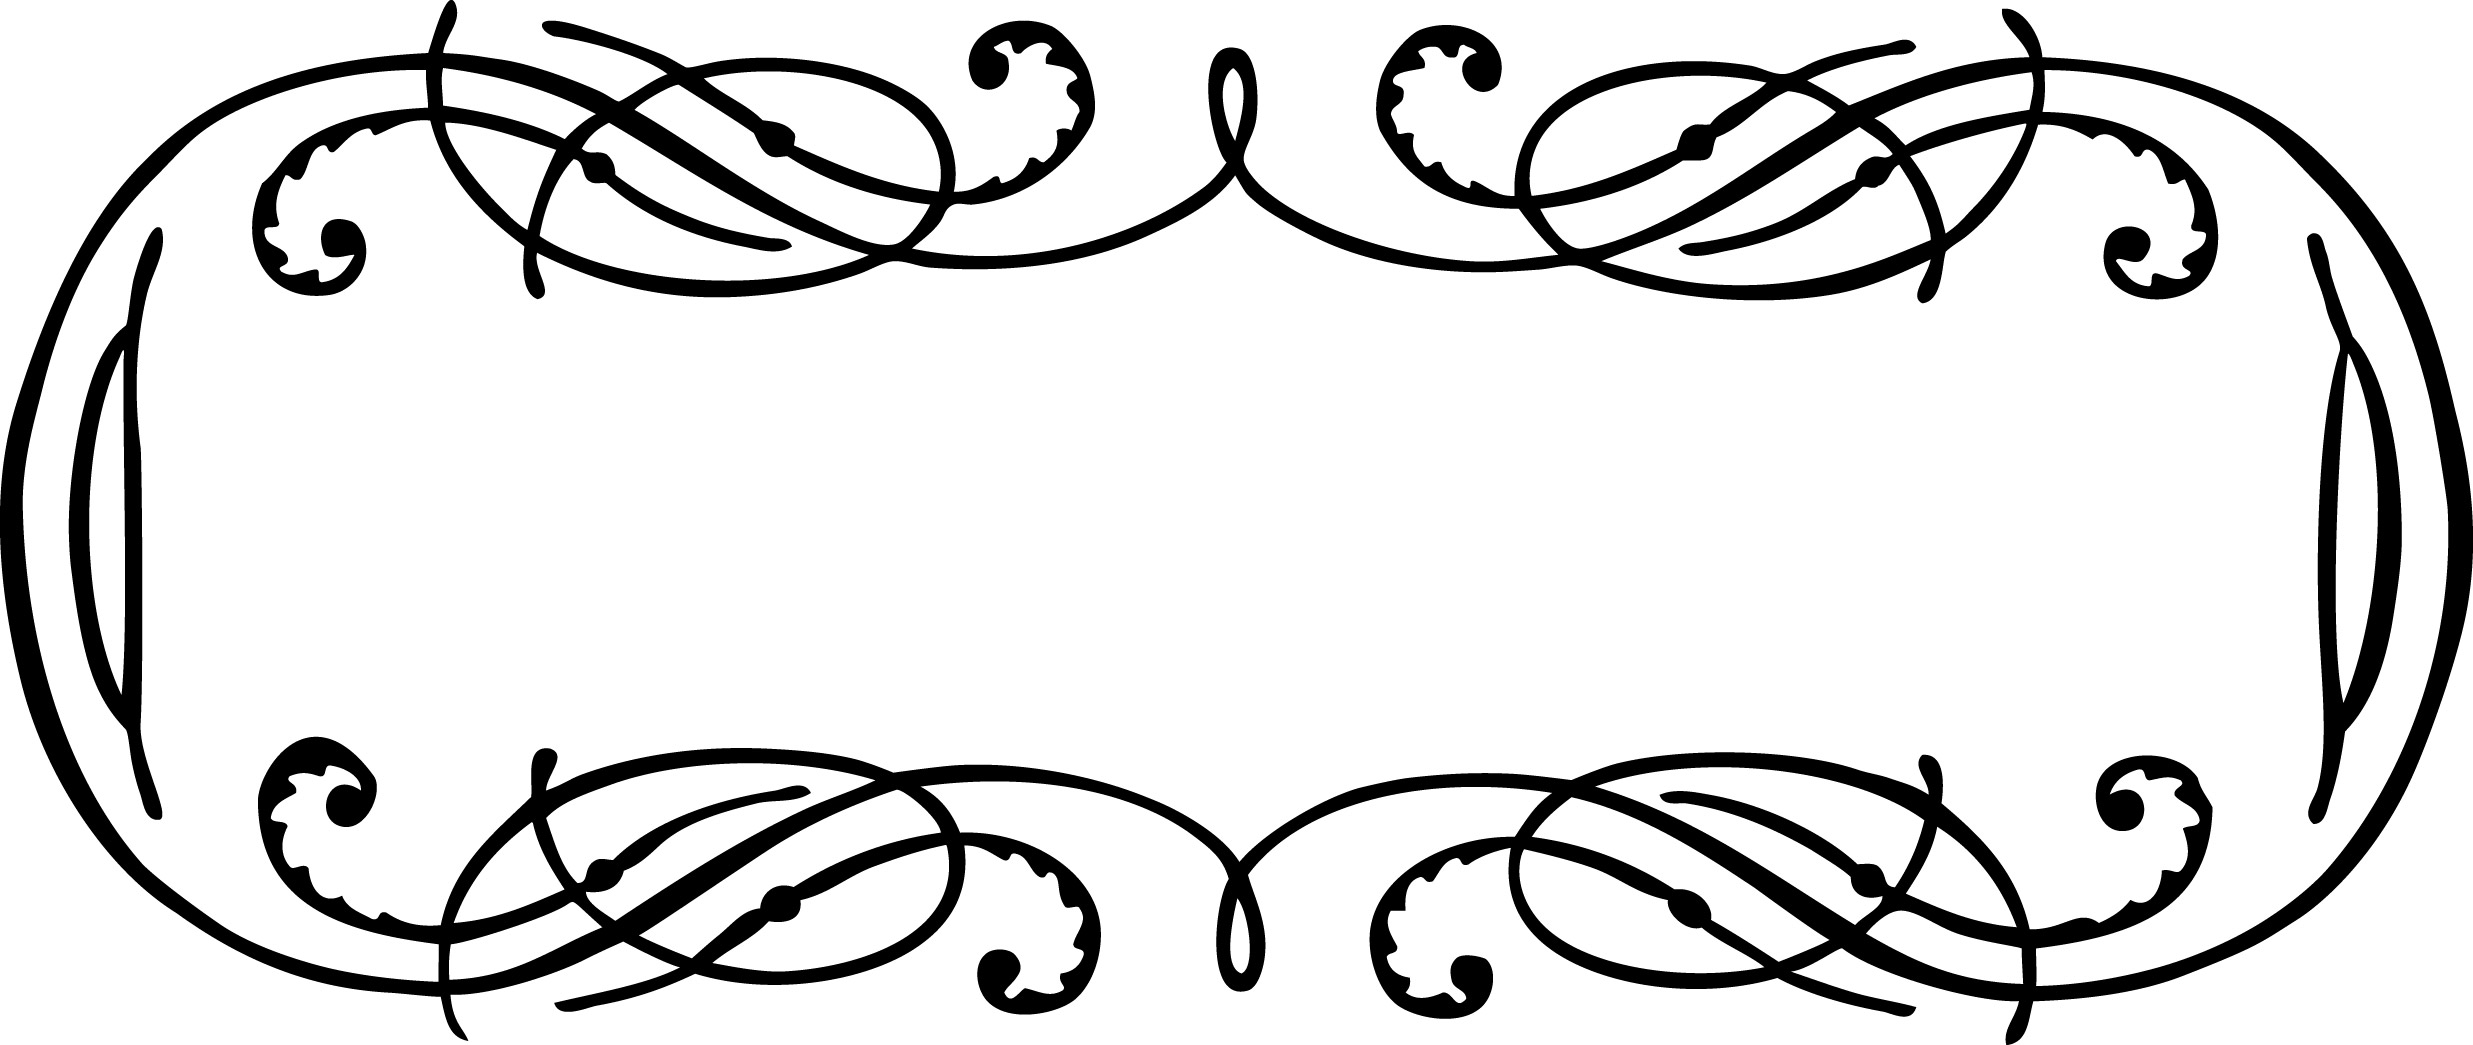 Calligraphy Clipart.